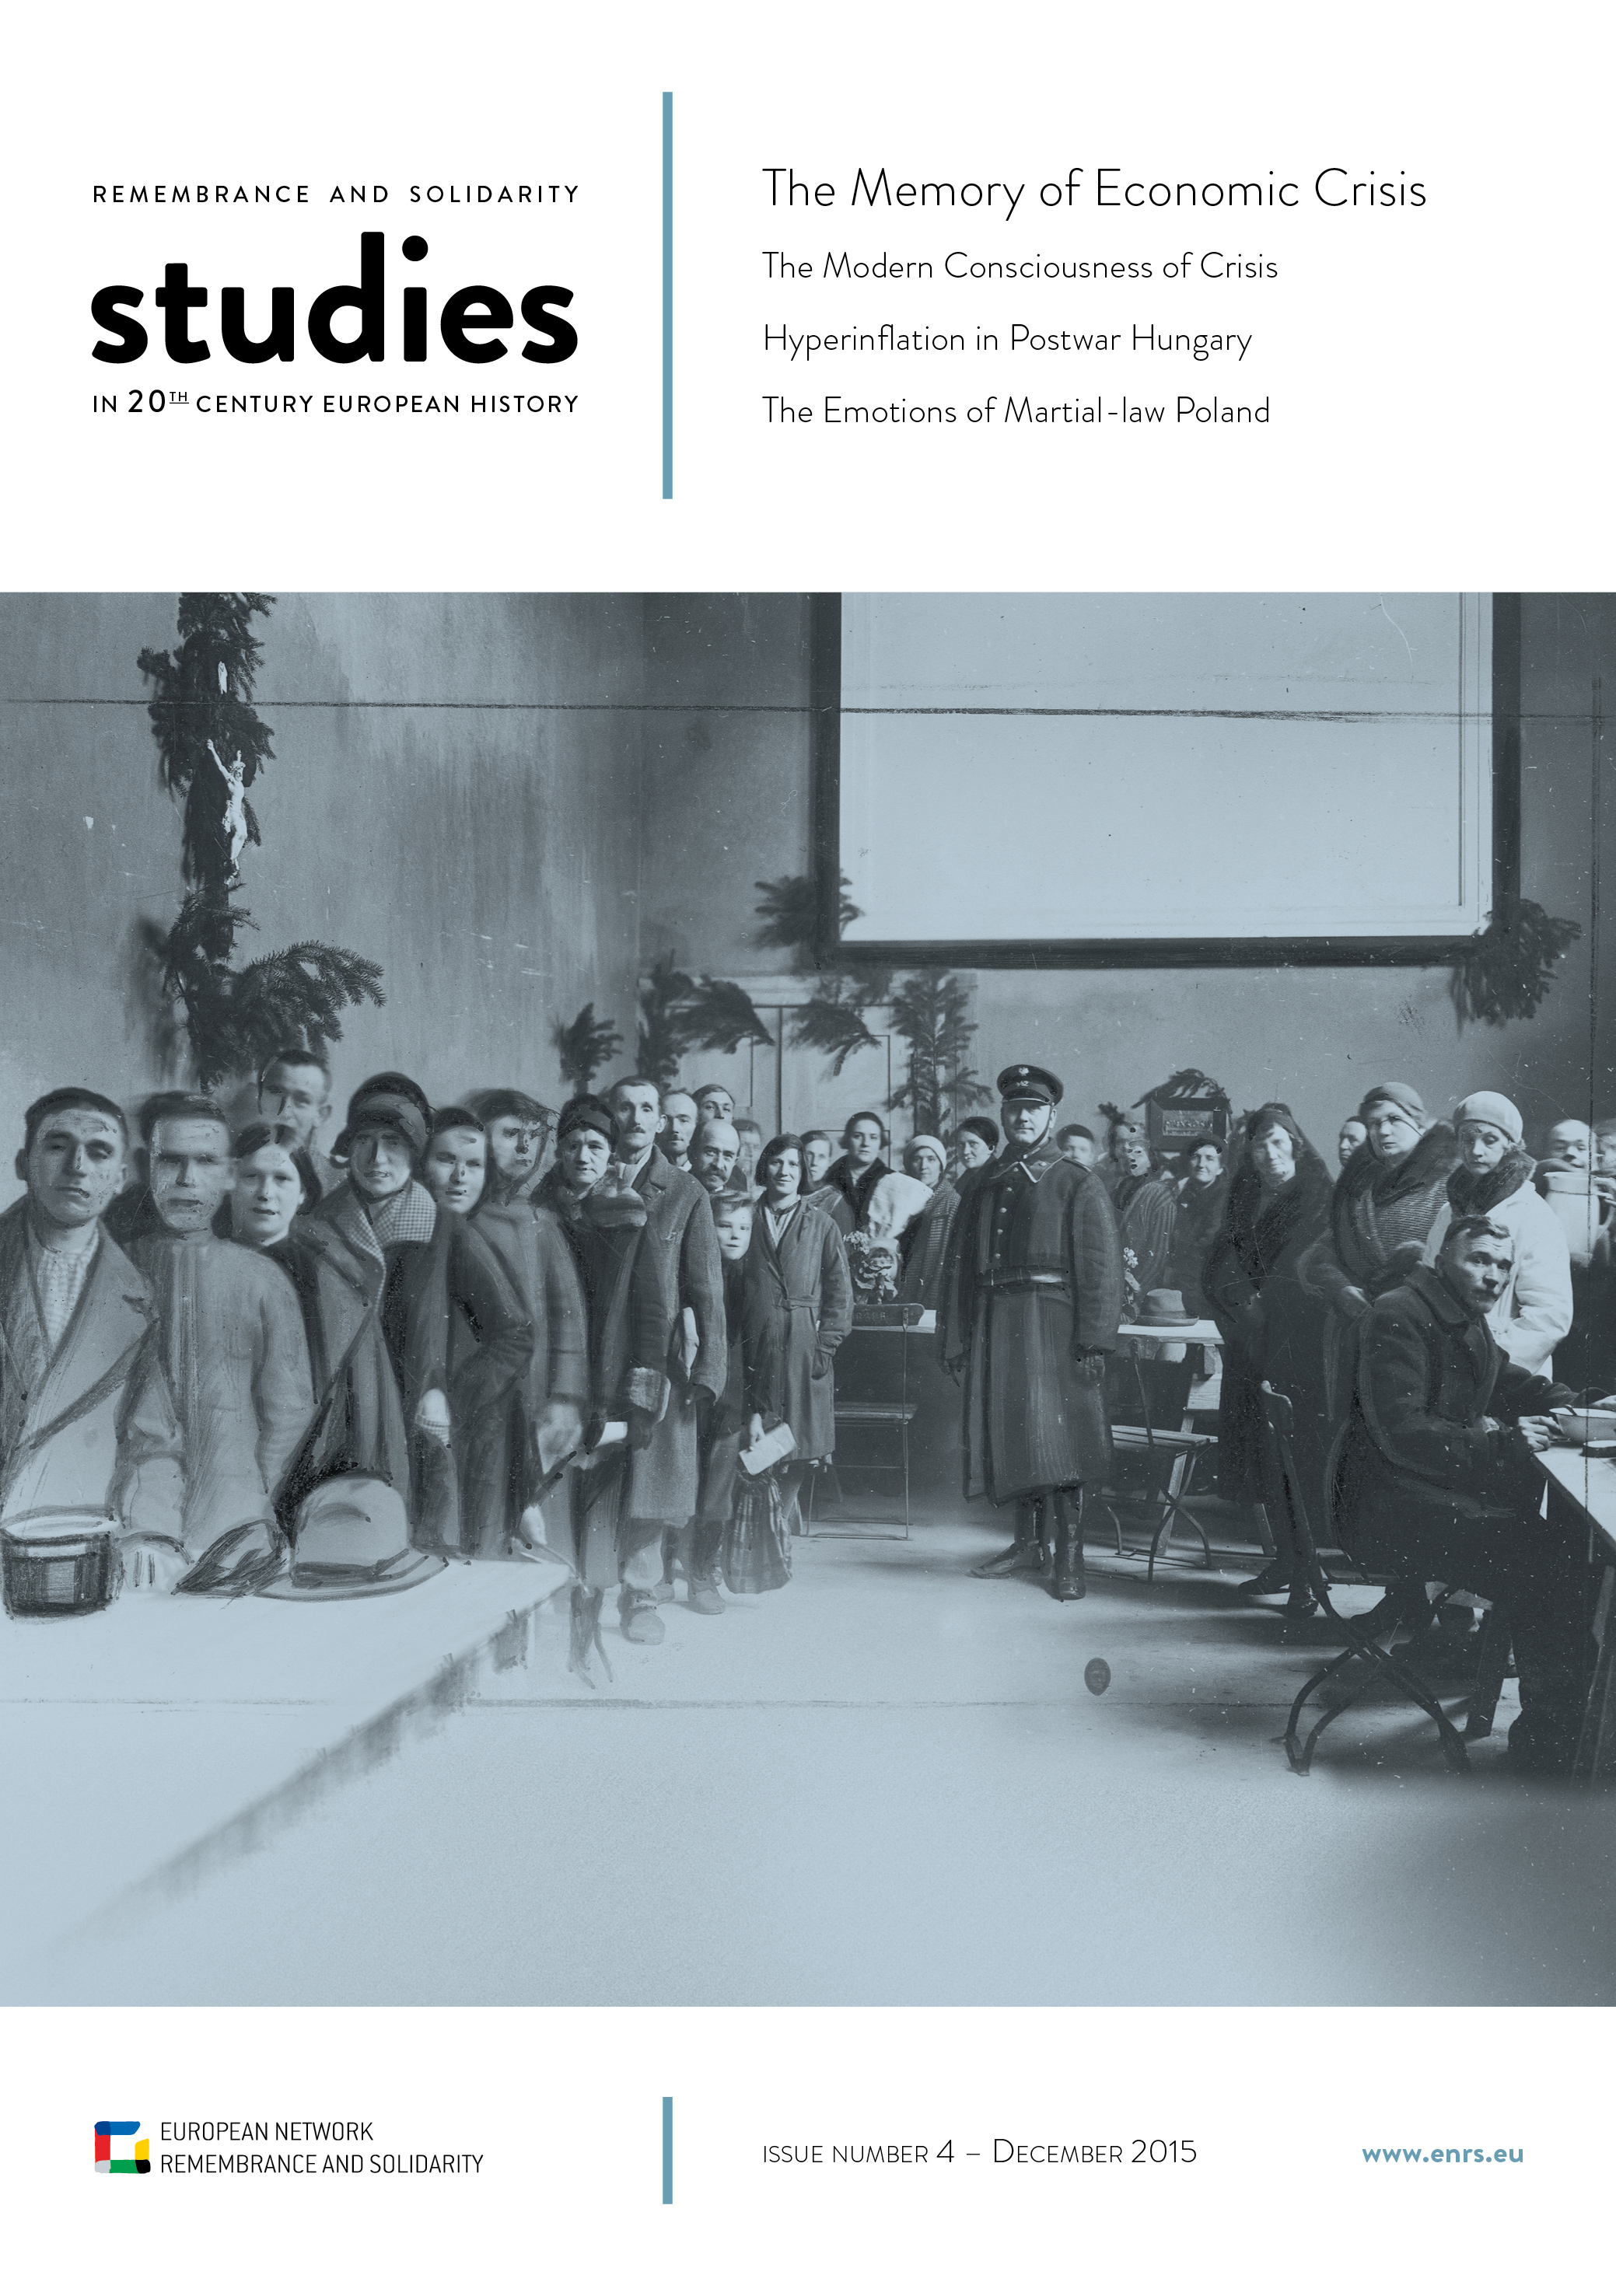 Photo of the publication Remembrance and Solidarity Studies in 20th Century European History. Issue no. 4. The Memory of Economic Crisis.